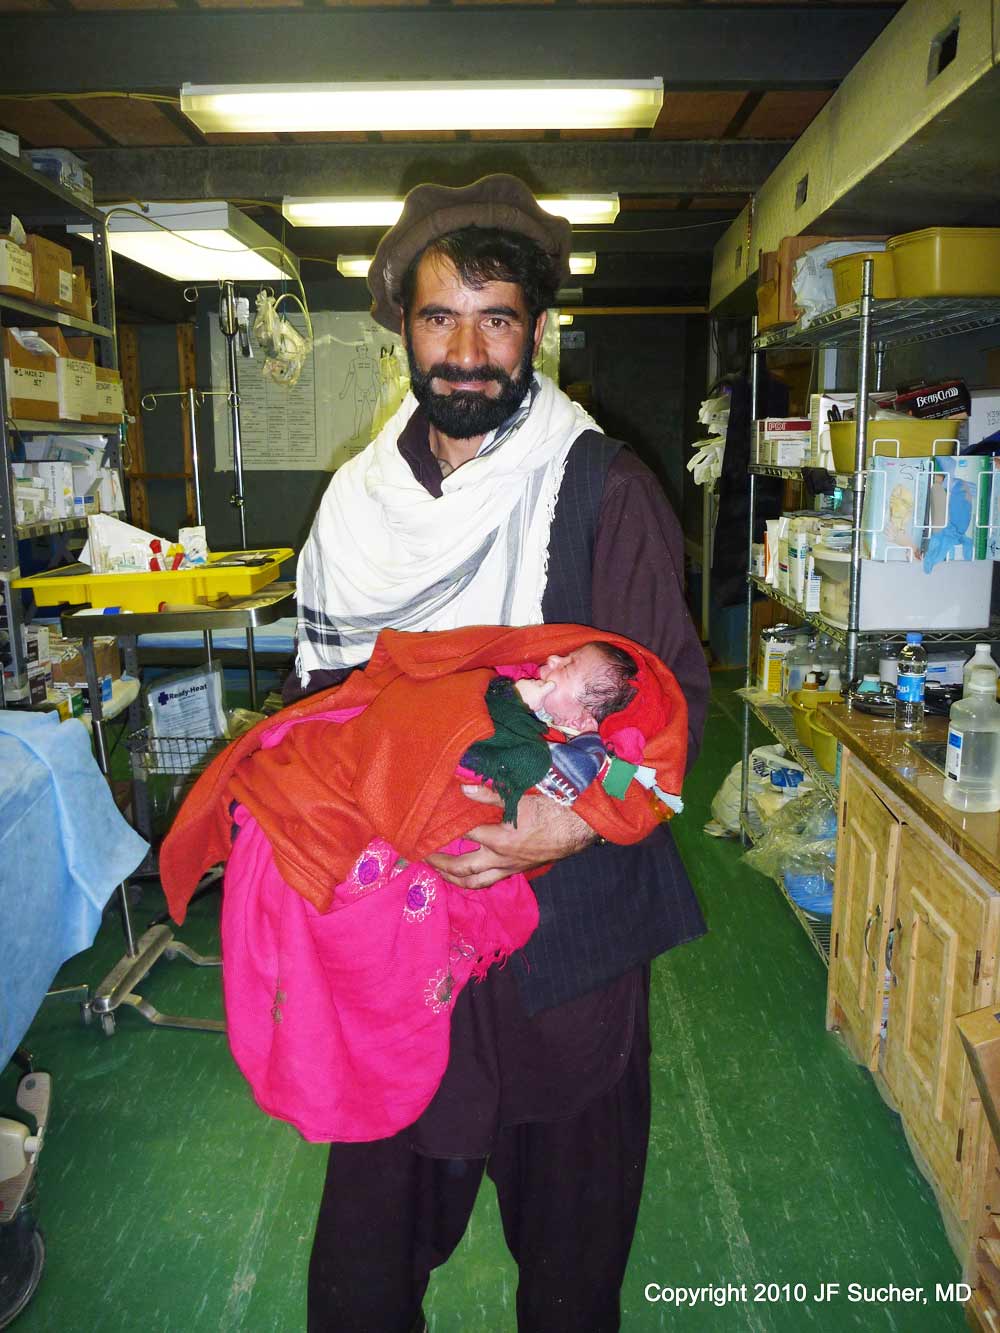 Orgune father with baby girl - Paktika Province, Afghanistan 2010.